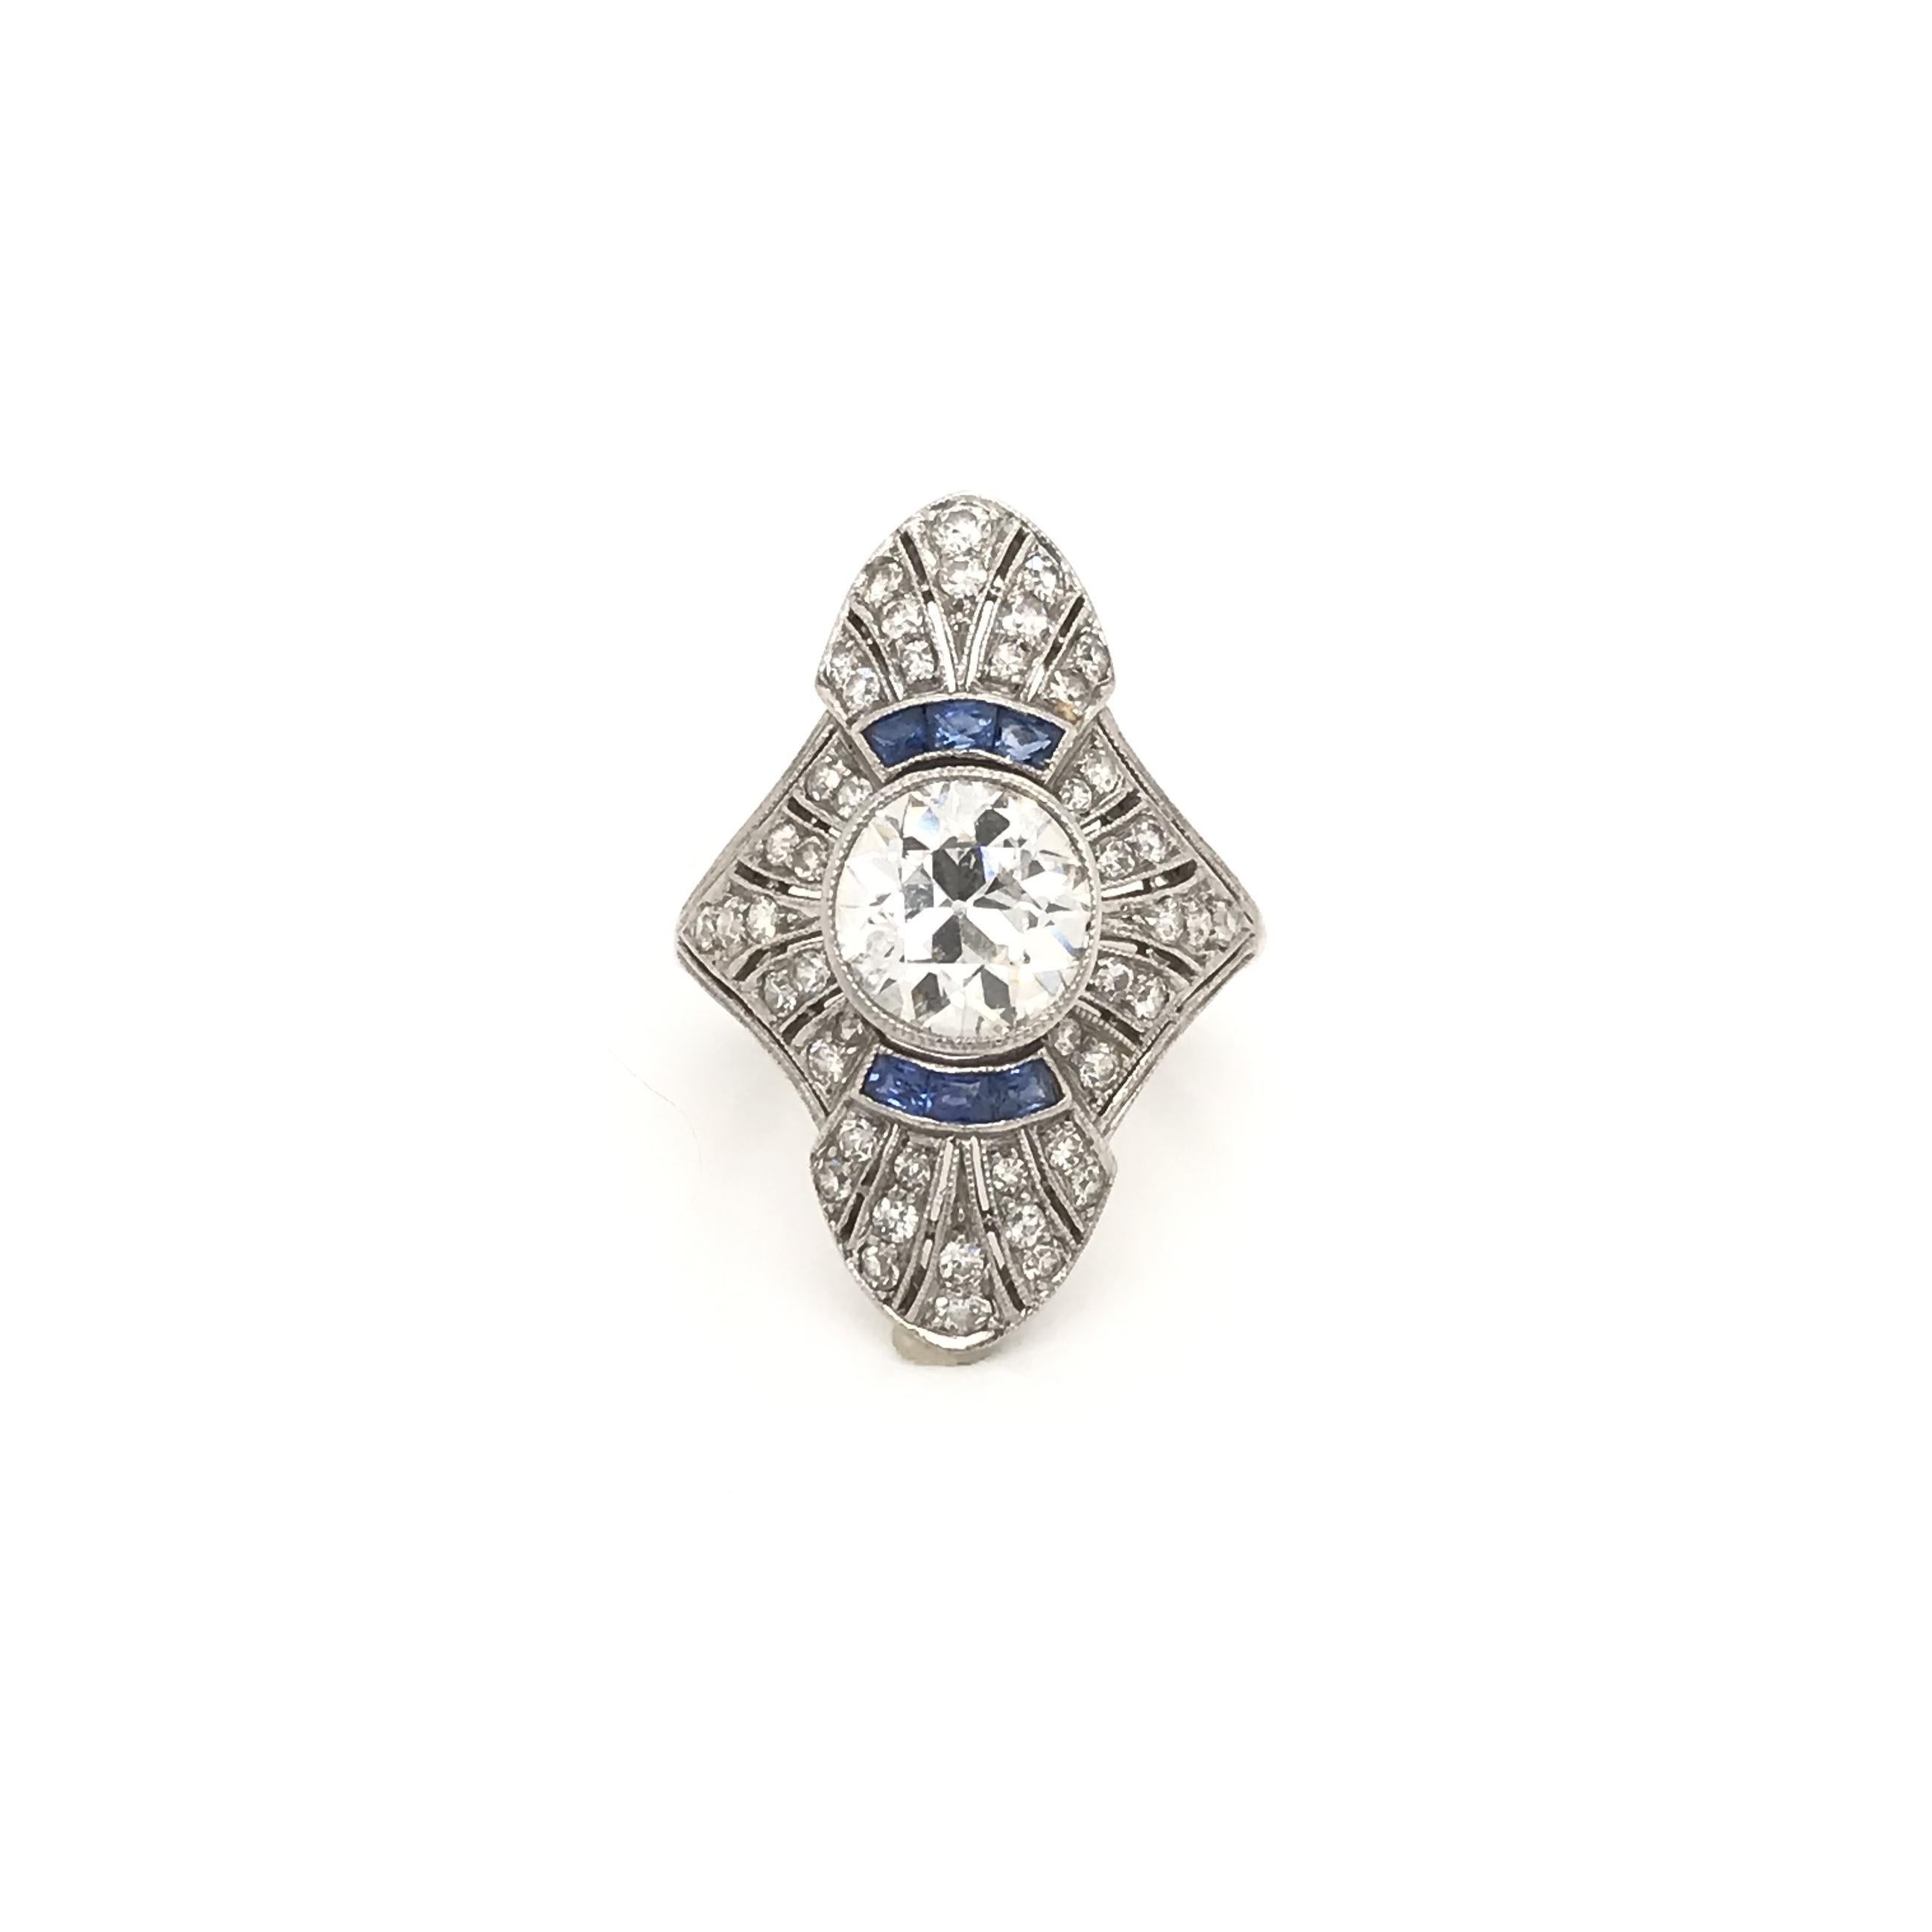 This exquisite antique piece was crafted sometime during the Art Deco design period (1920-1940). The platinum filigree setting features an antique Old European cut center diamond measuring approximately 1.60 carats. The diamond grades approximately